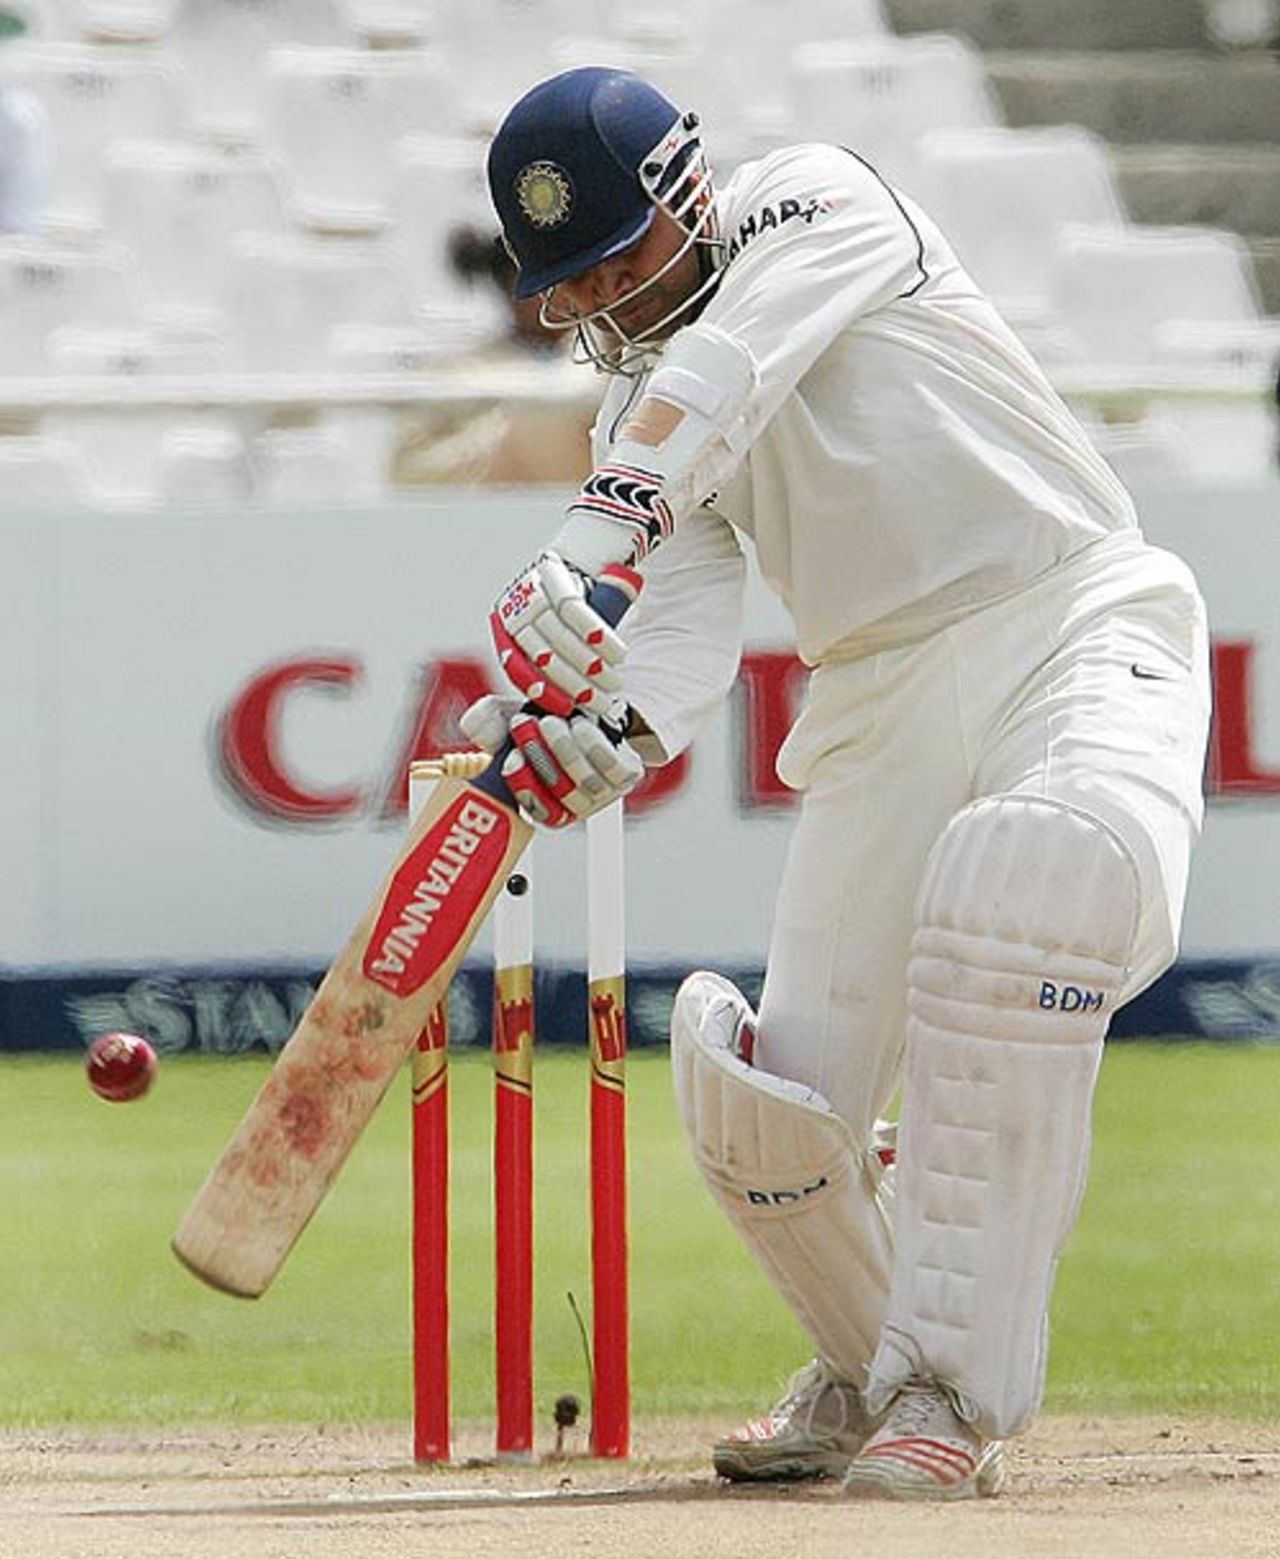 Virender Sehwag edges an ambitious drive, South Africa v India, 3rd Test, Cape Town, 4th day, January 5, 2007